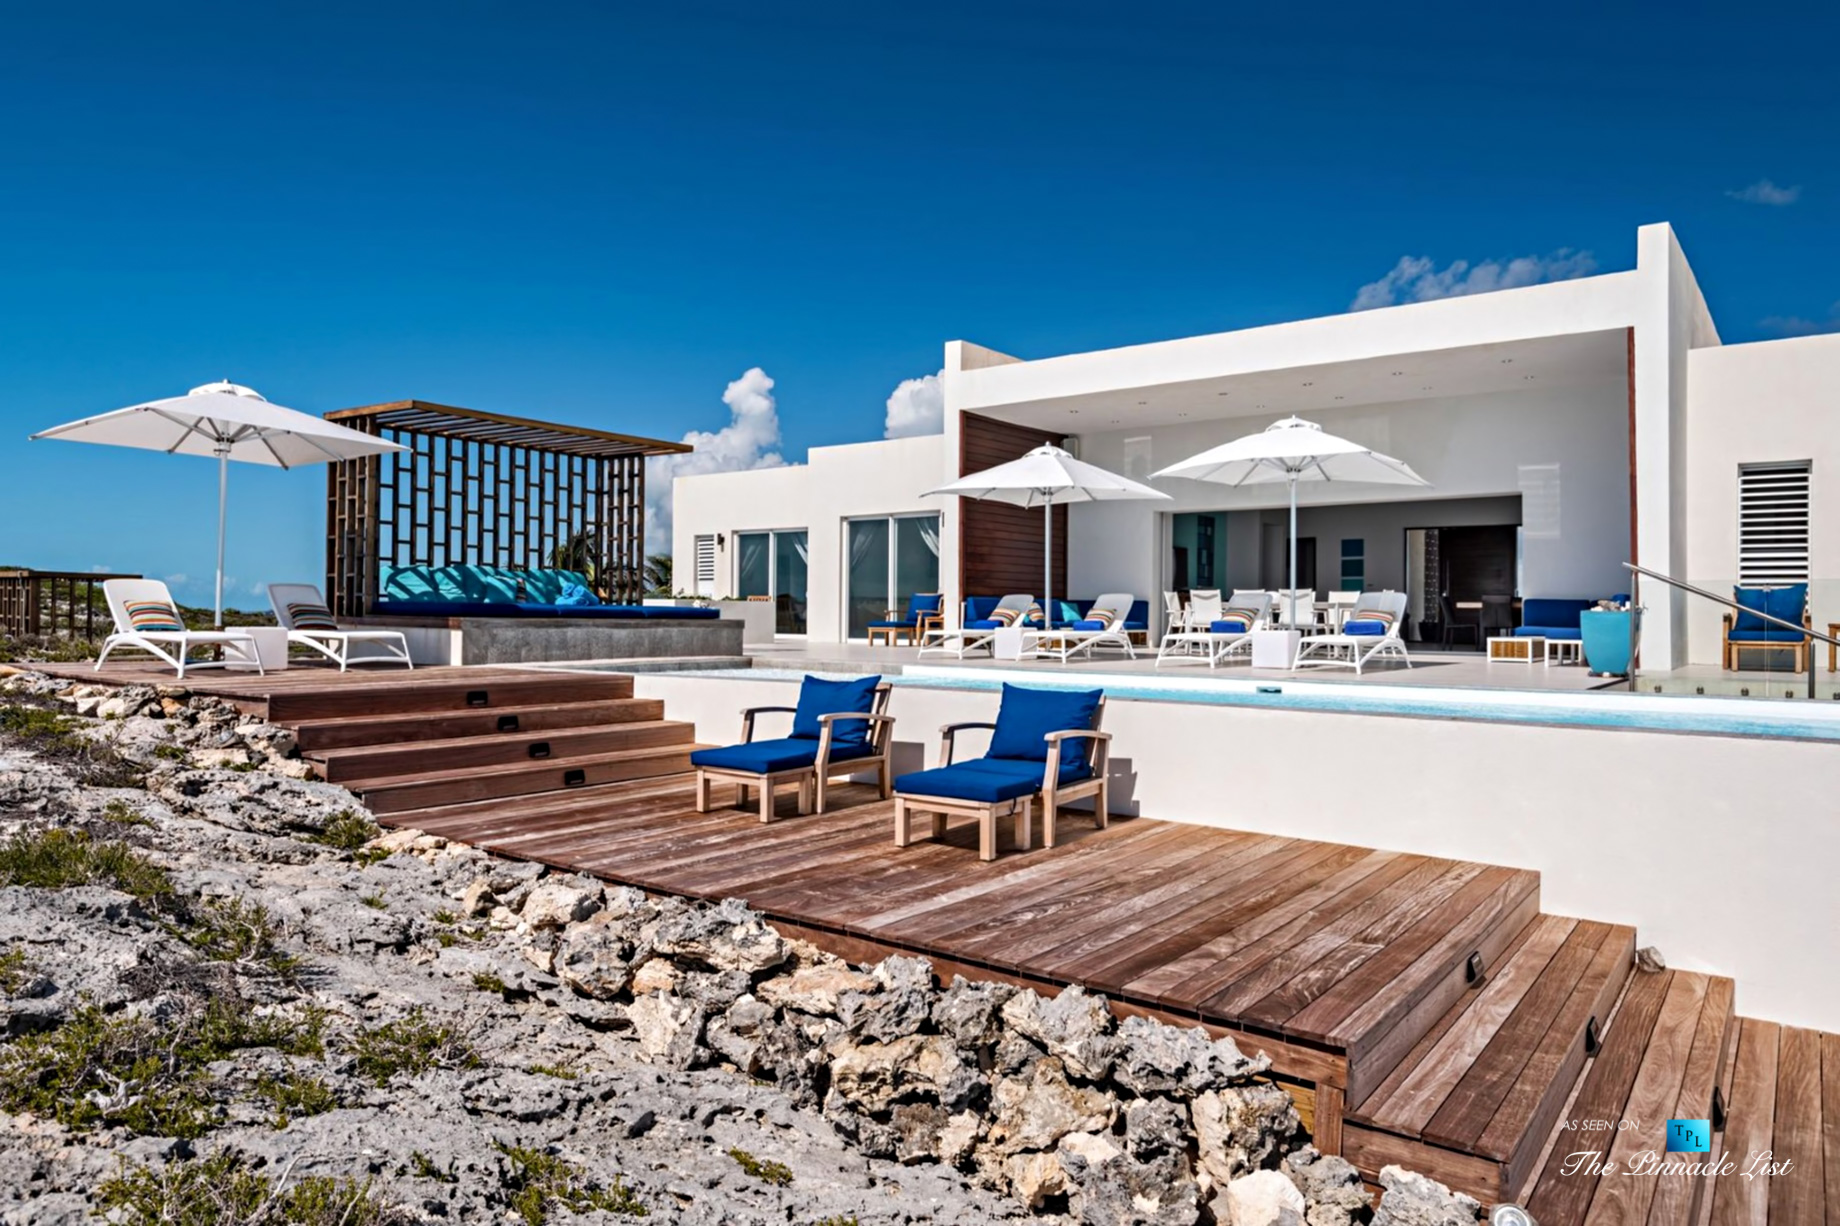 Tip of the Tail Villa - Providenciales, Turks and Caicos Islands - Caribbean Oceanfront House Deck - Luxury Real Estate - South Shore Peninsula Home